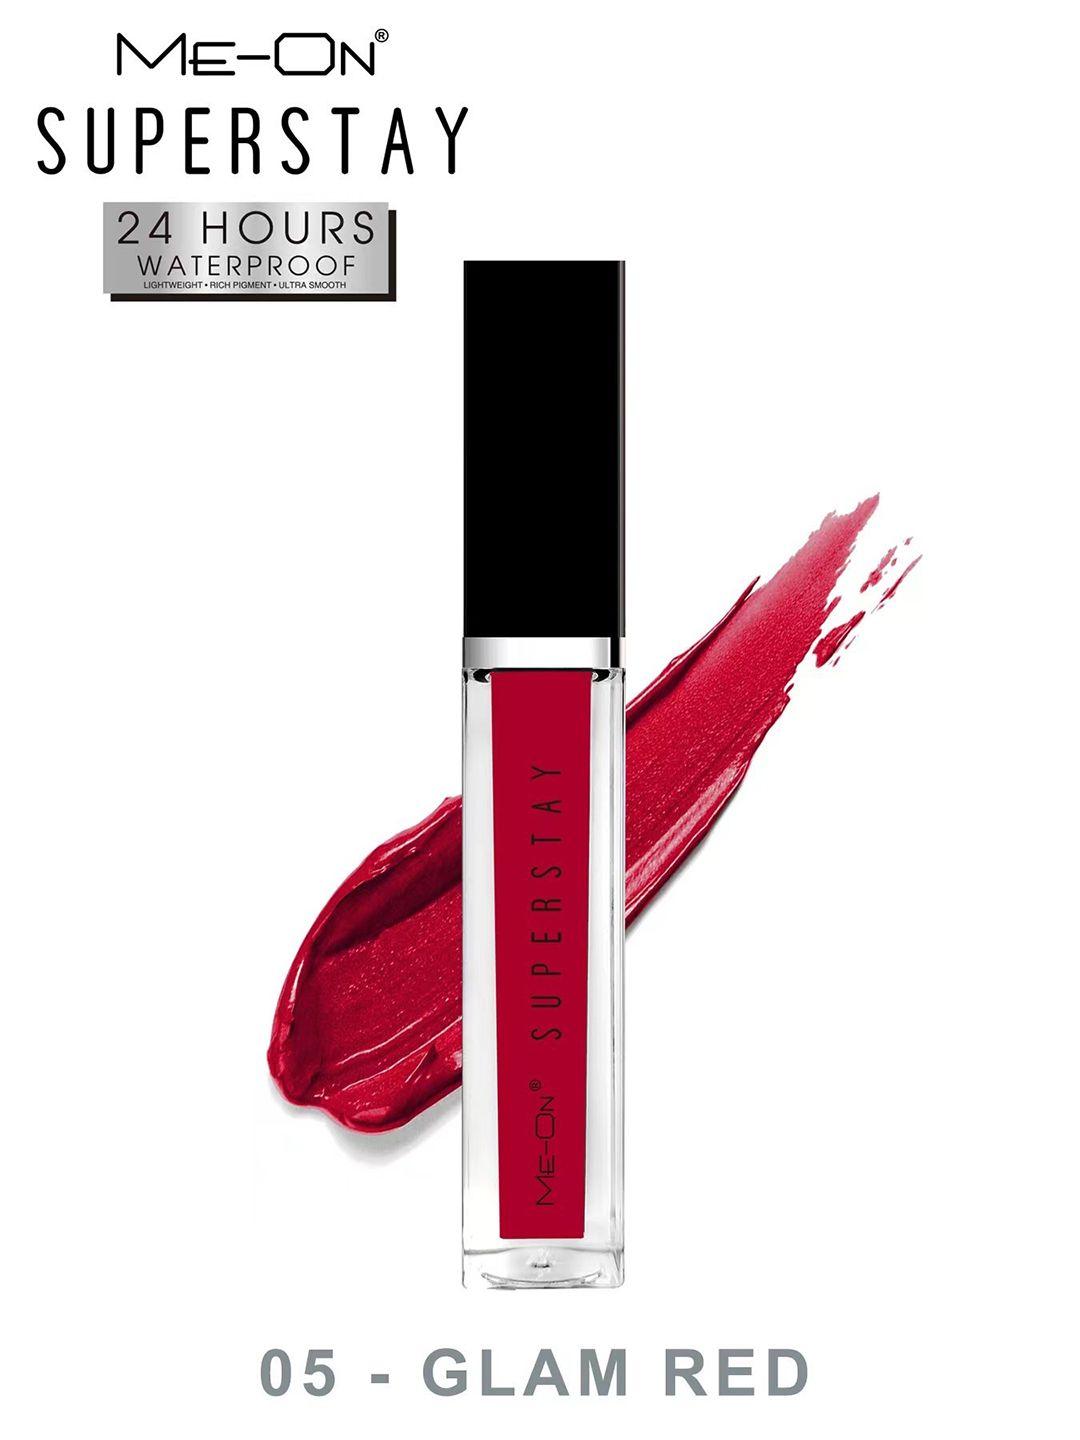 me-on waterproof 24hrs super stay lip gloss 6 ml - glam red 05